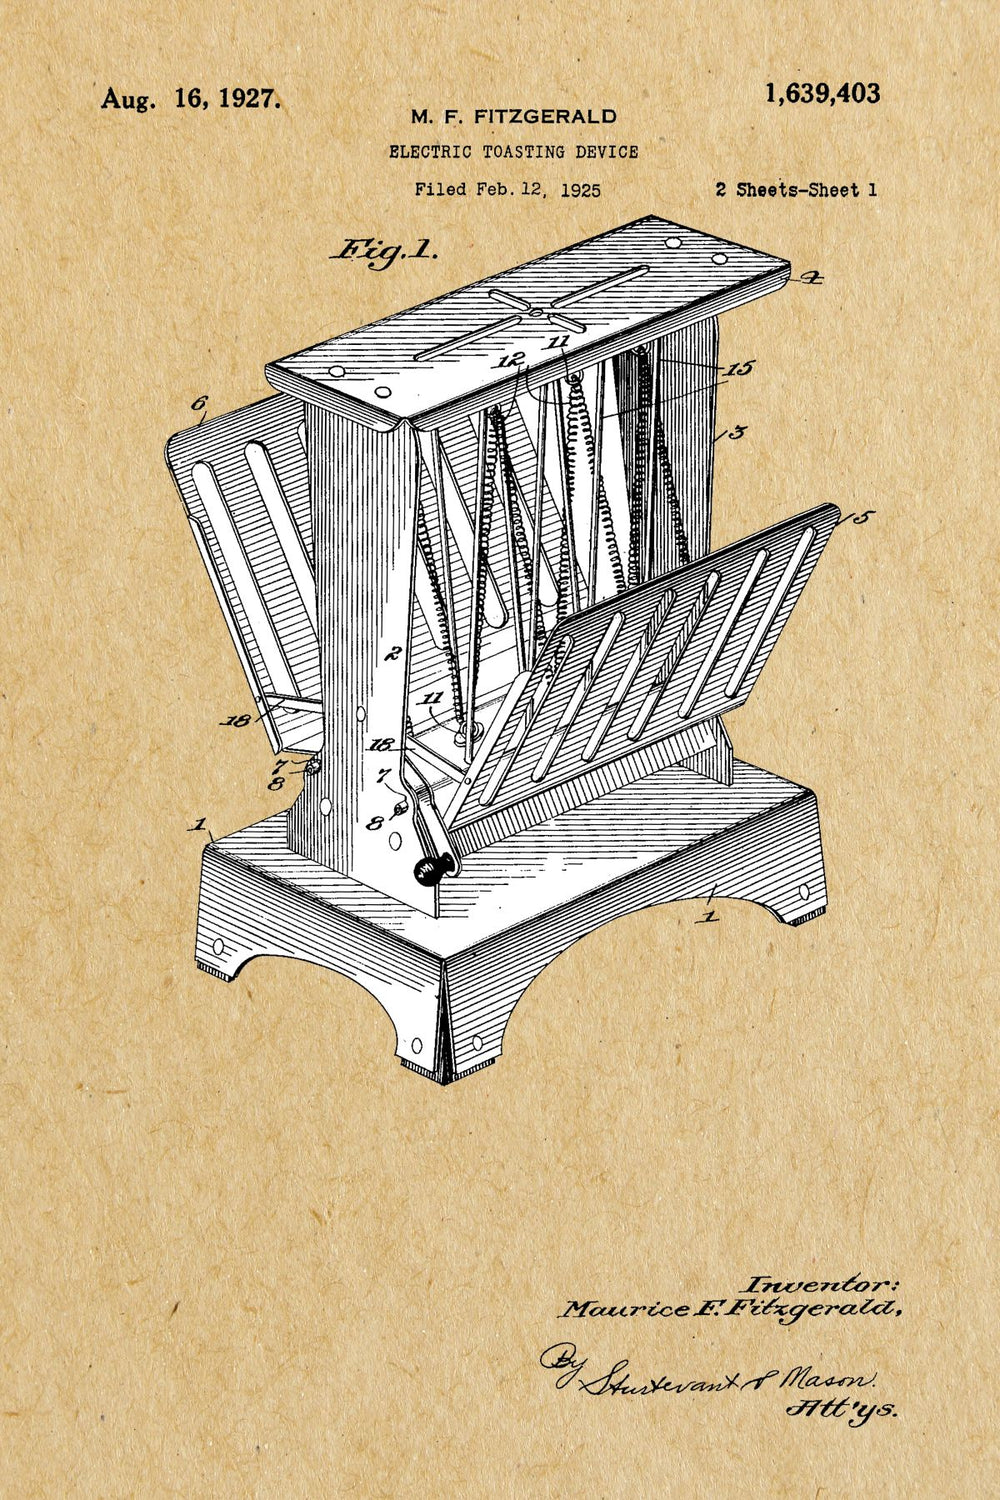 Electric Toasting Device Vintage Patent